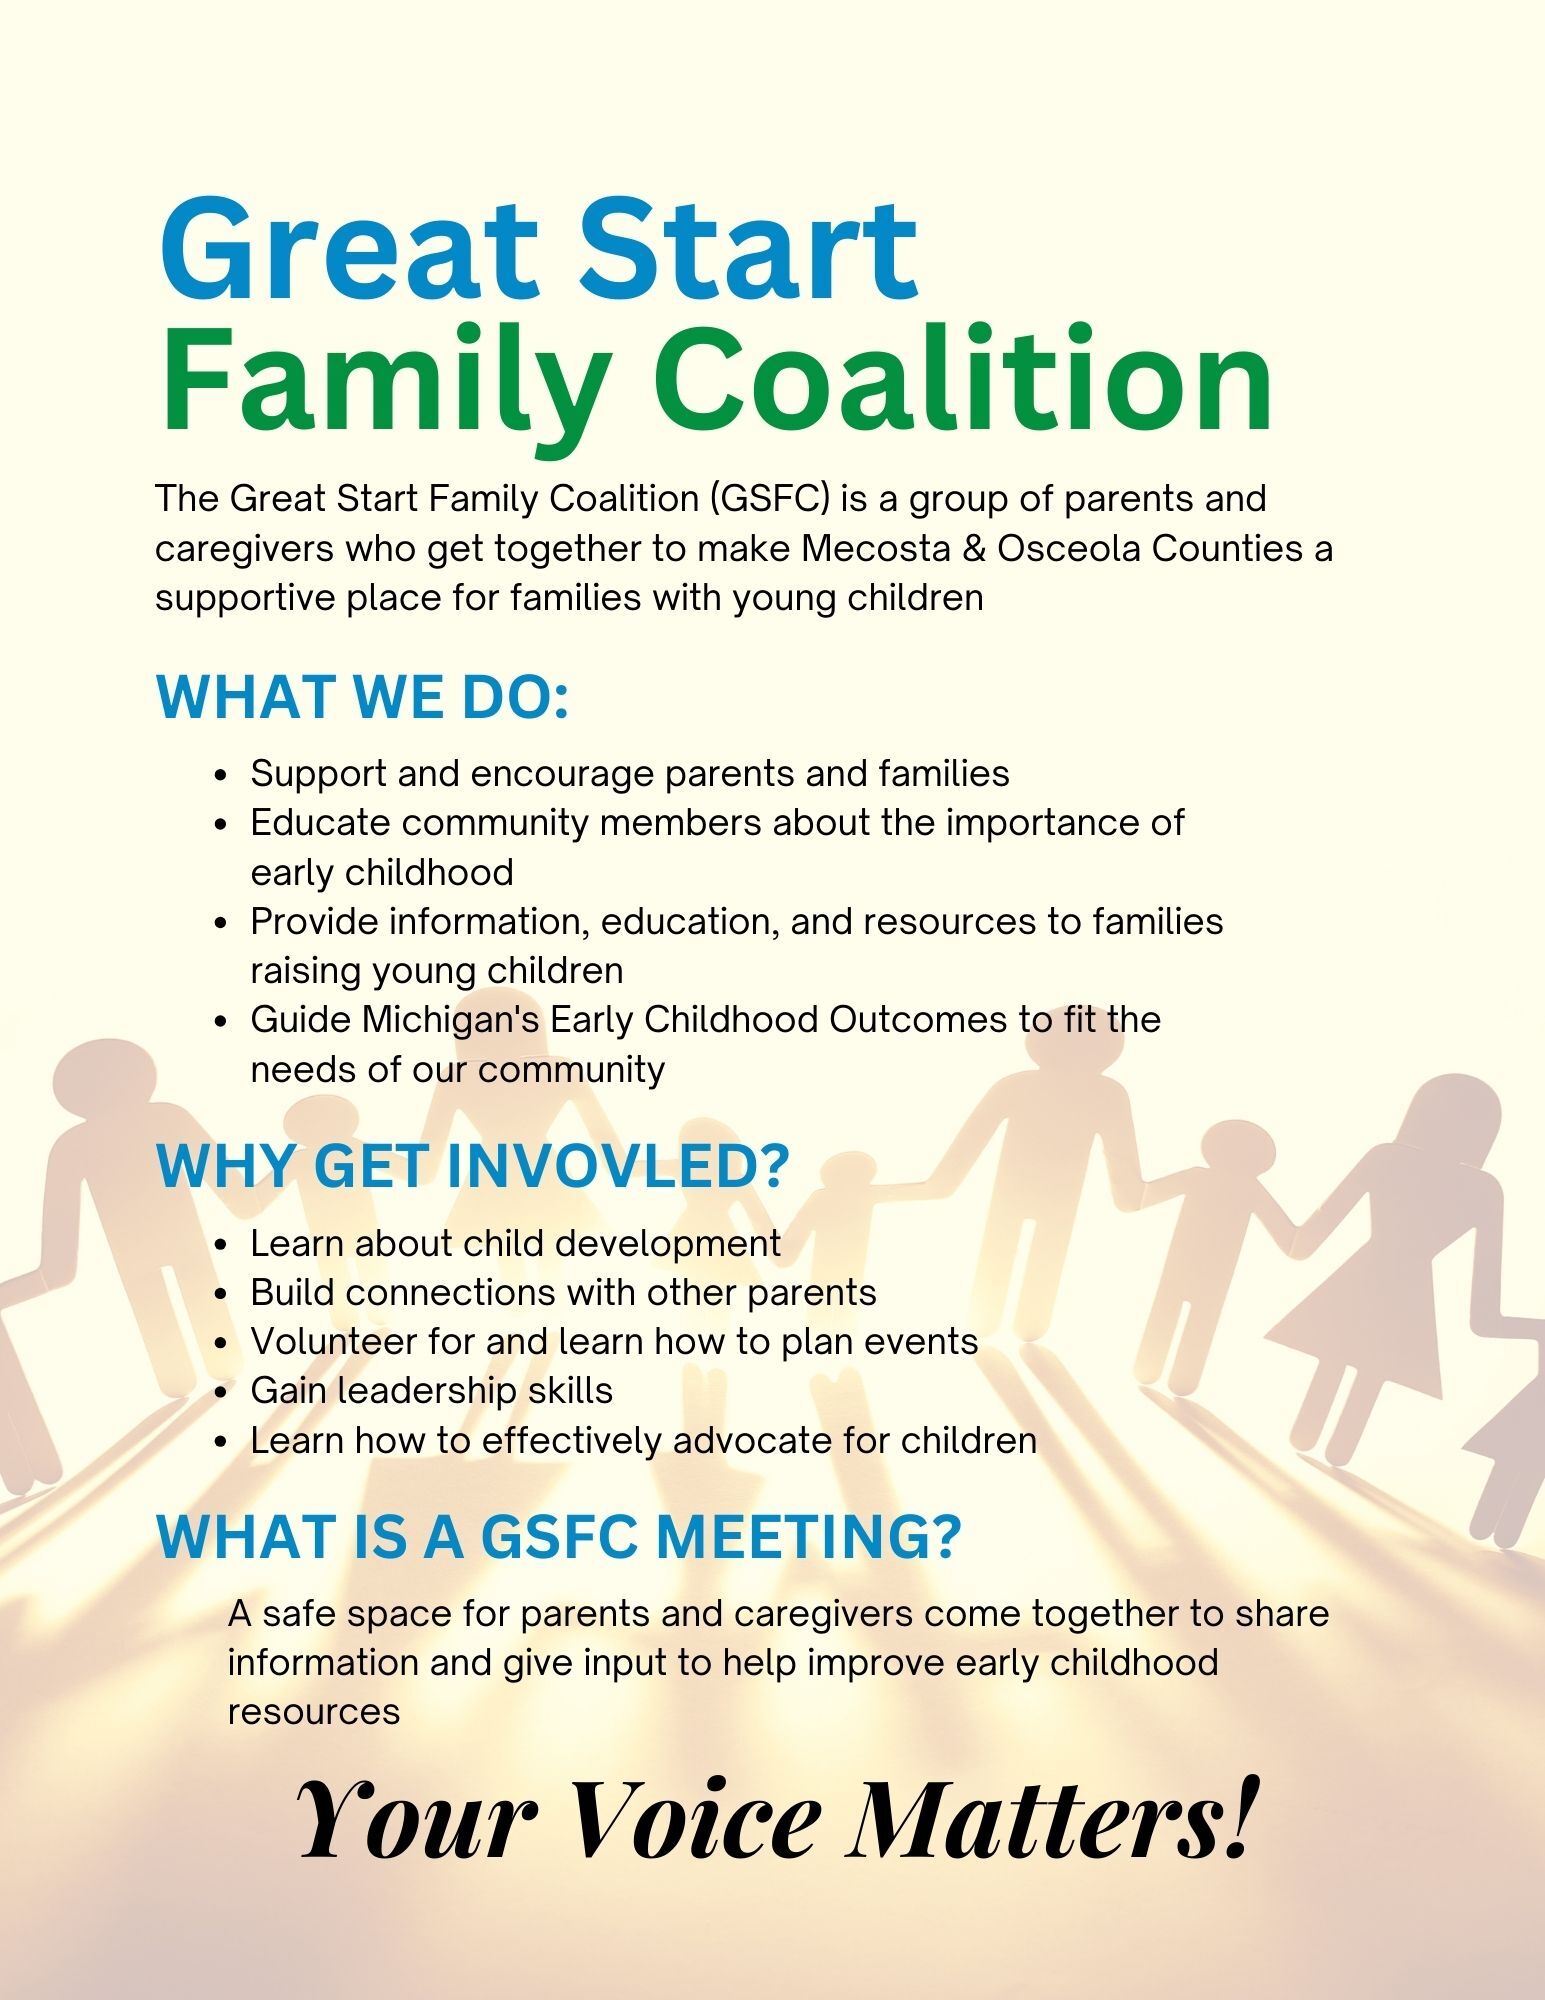 The Great Start Family Coalition is a group of parents and caregivers who get together to make Mecosta & Osceola Counties a supportive place for families with young children.What we do:Support and encourage parents and families Educate community members about the importance of early childhood Provide information, education, and resources to families raising young children Guide Michigan's Early Childhood Outcomes to fit the needs of our community Why get invovled? Learn about child development Build connections with other parents Volunteer for and learn how to plan events Gain leadership skills Learn how to effectively advocate for childrenWhat is a GSFC Meeting?  A safe space for parents and caregivers come together to share information and give input to help improve early childhood resources